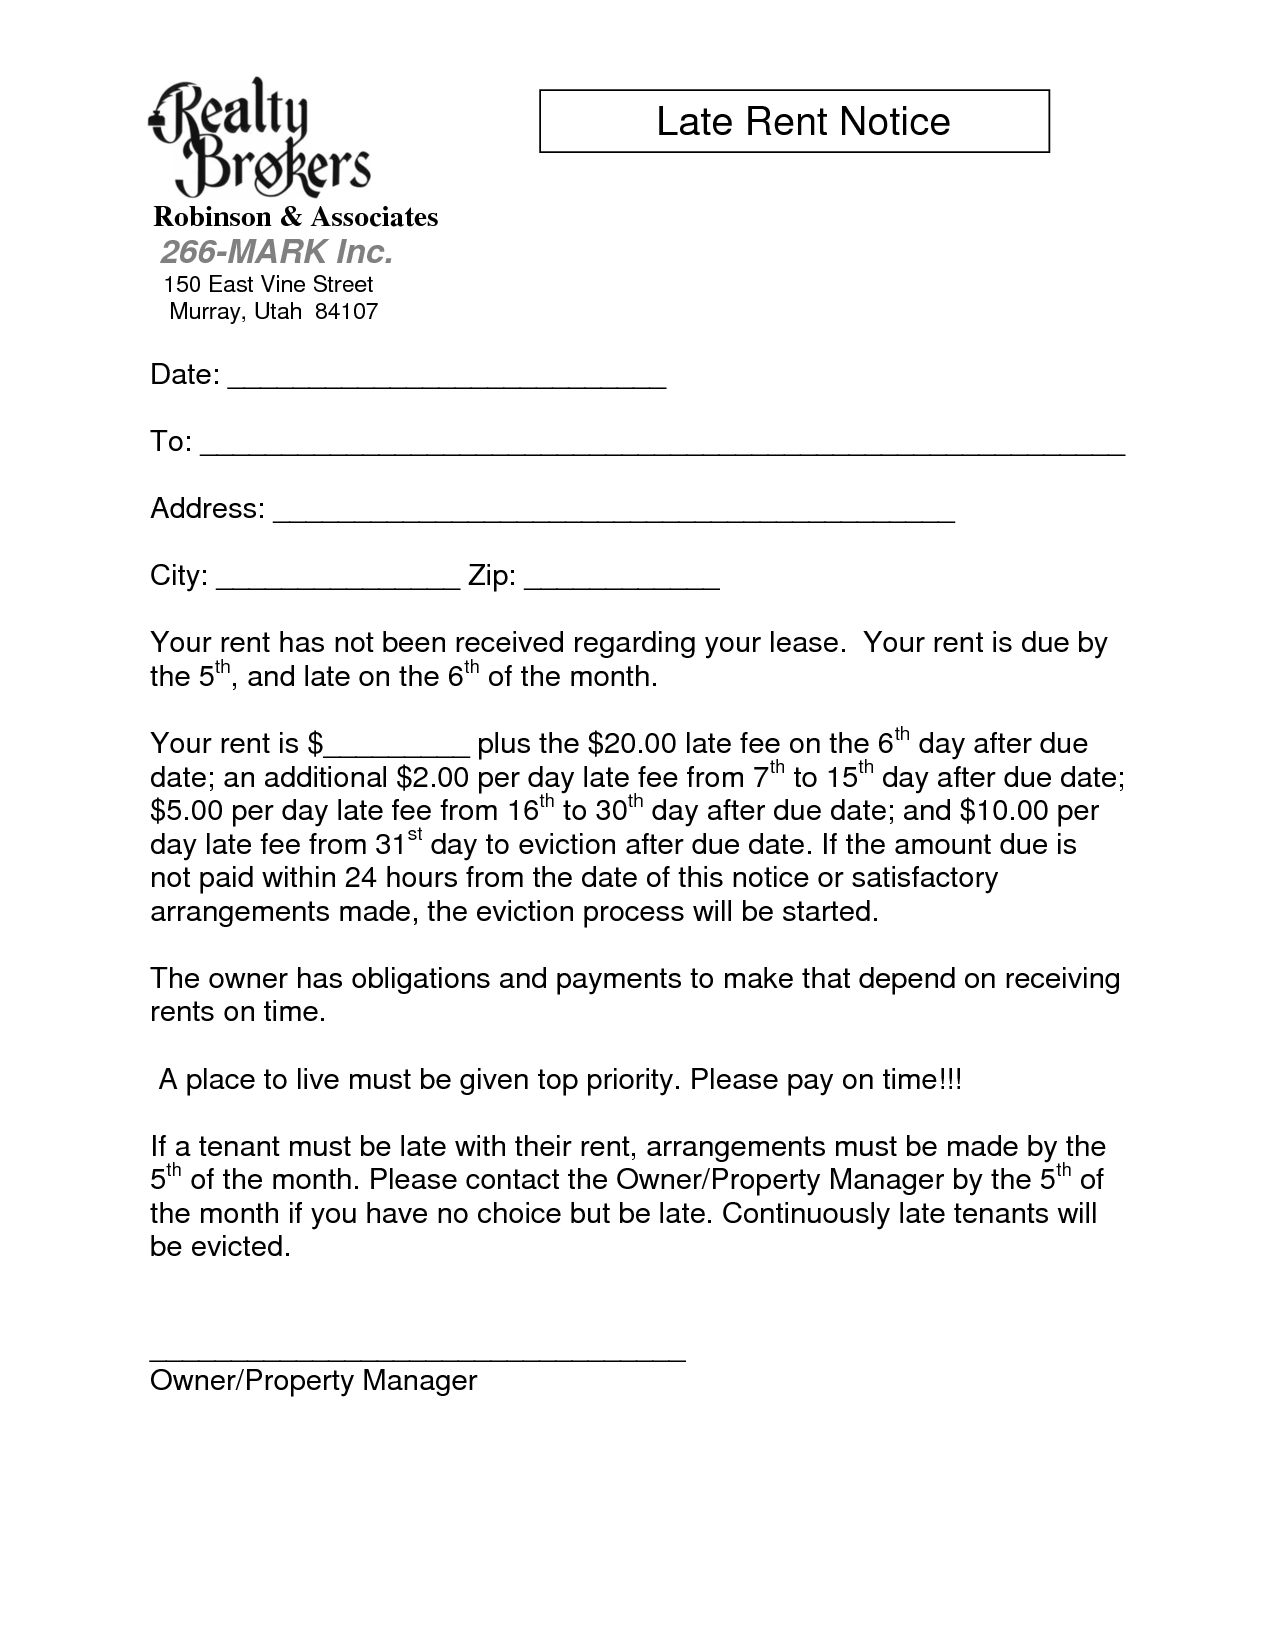 sample-late-rent-notice-free-printable-documents